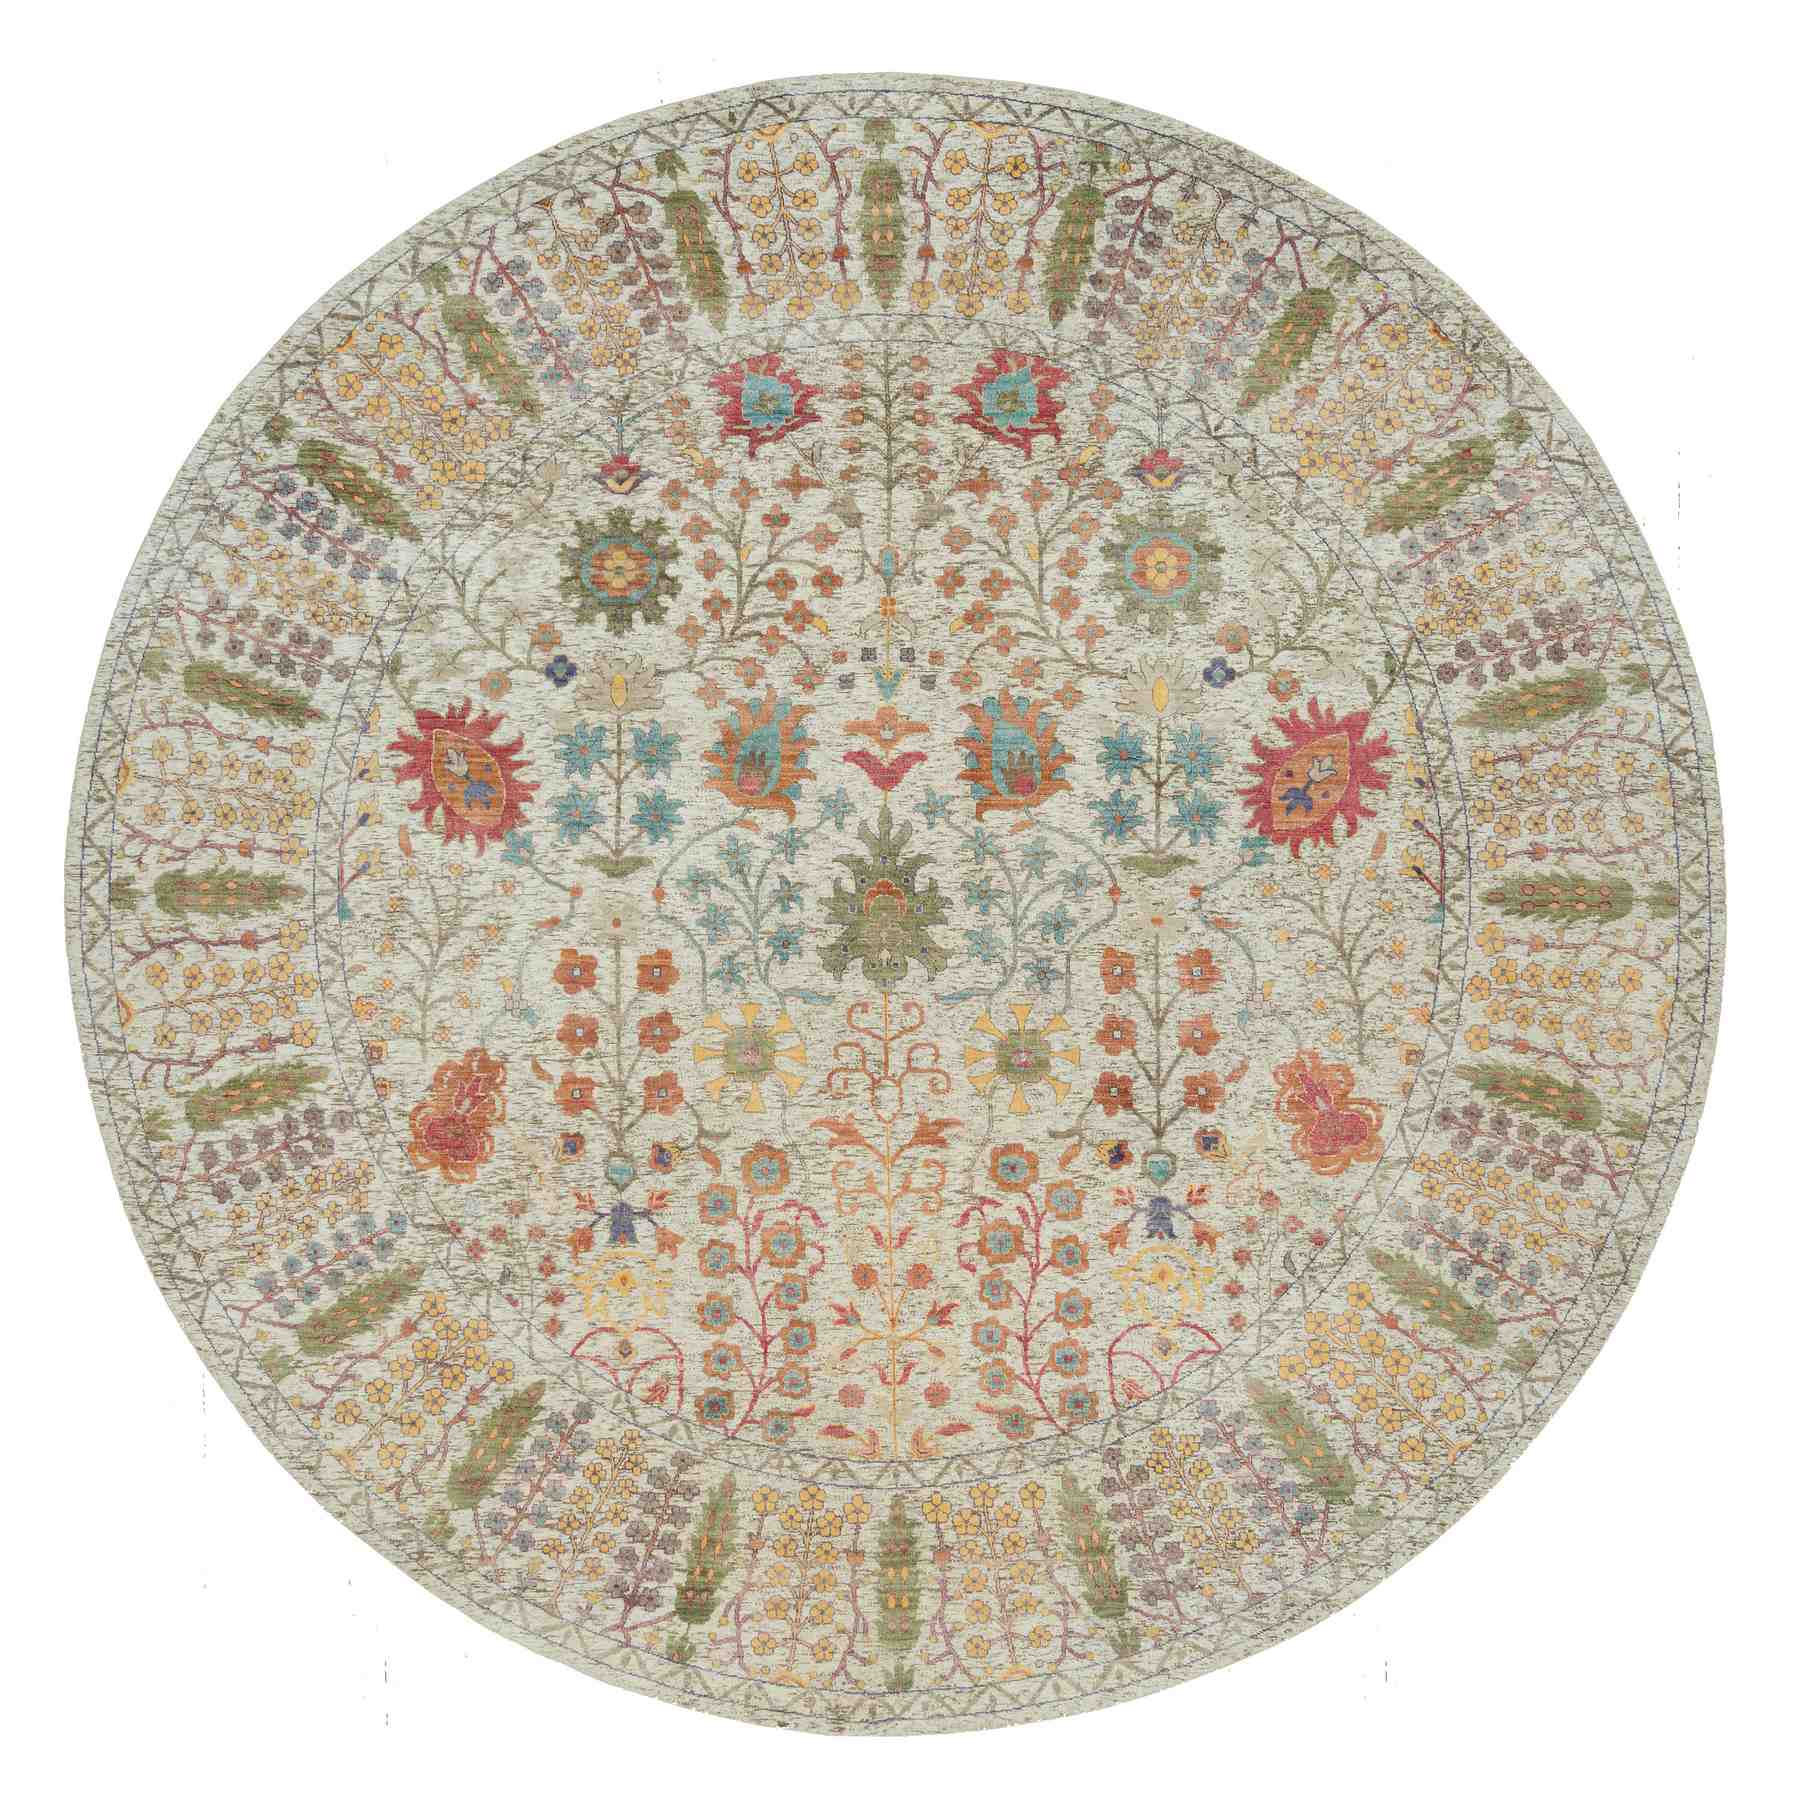 Transitional-Hand-Knotted-Rug-451275